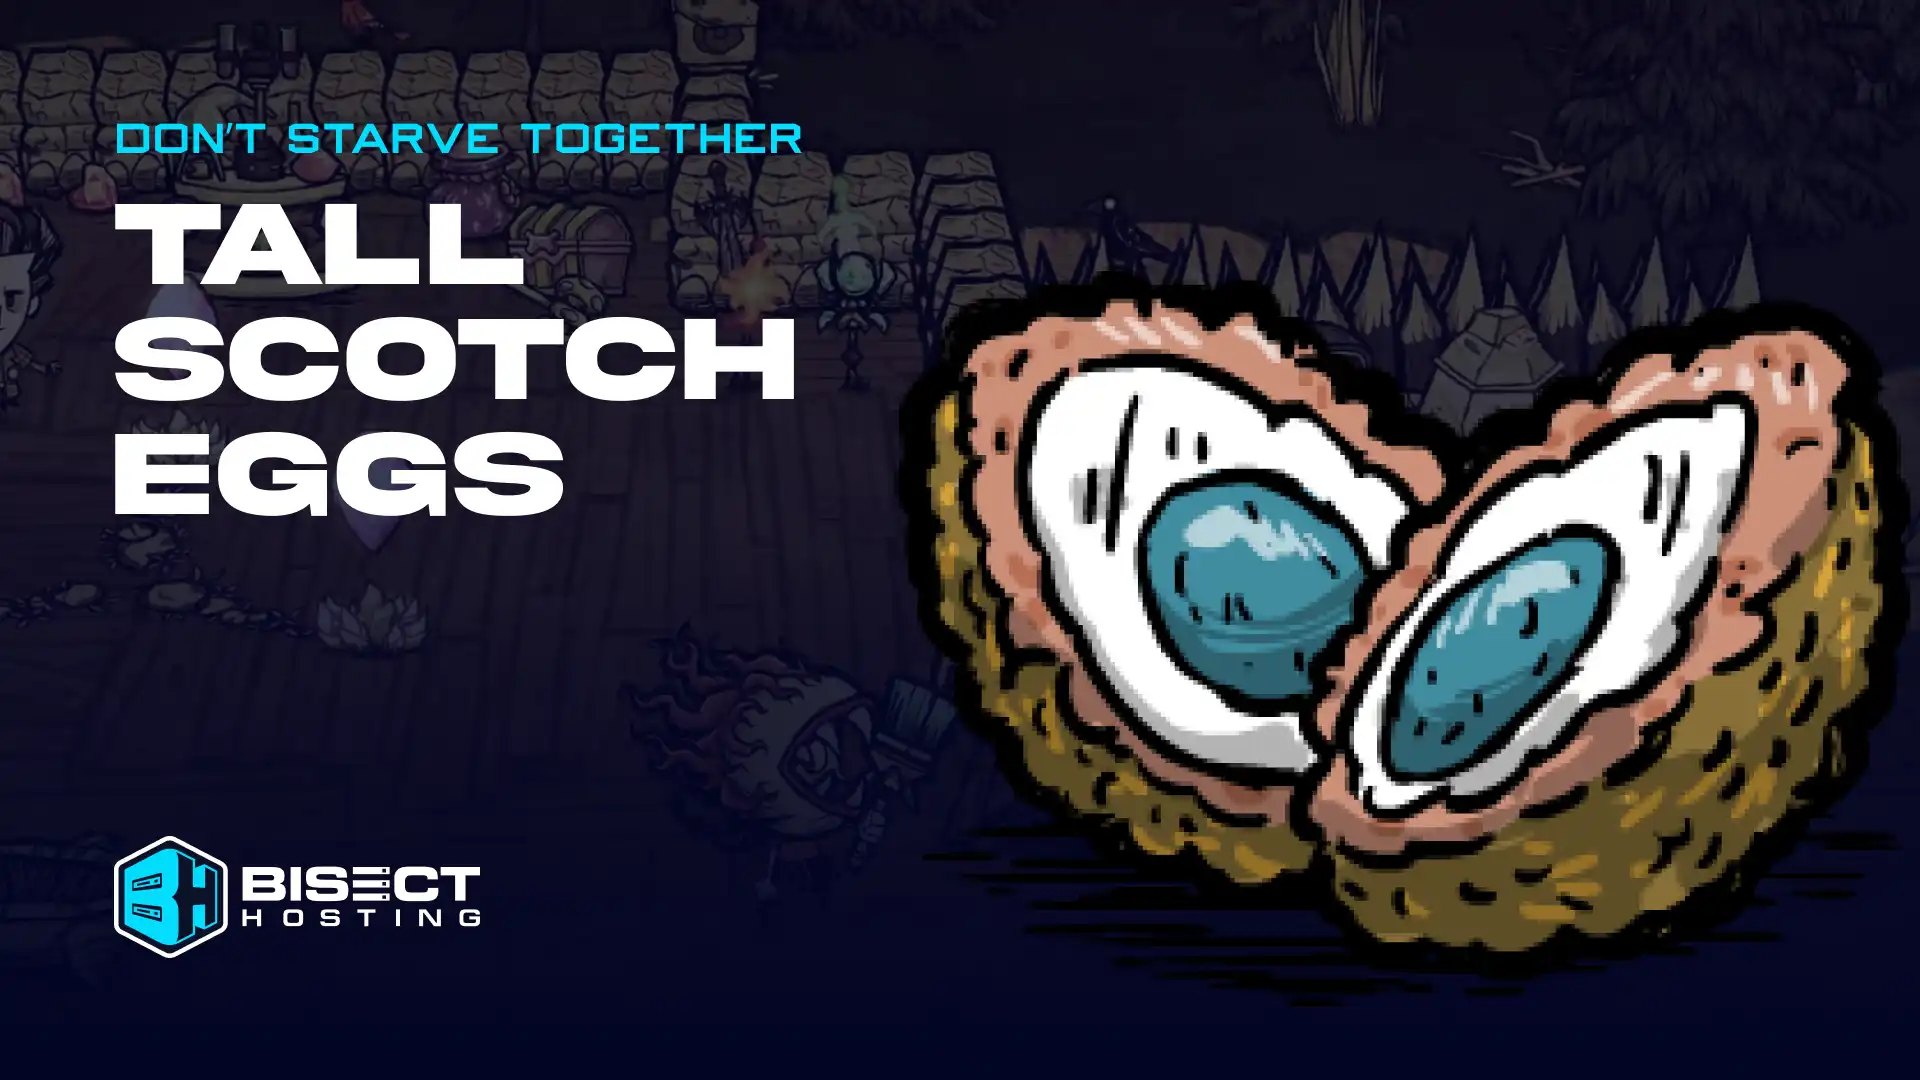 Don’t Starve Together Tall Scotch Eggs Guide - Ingredient Recipes, How to Make, and Usage